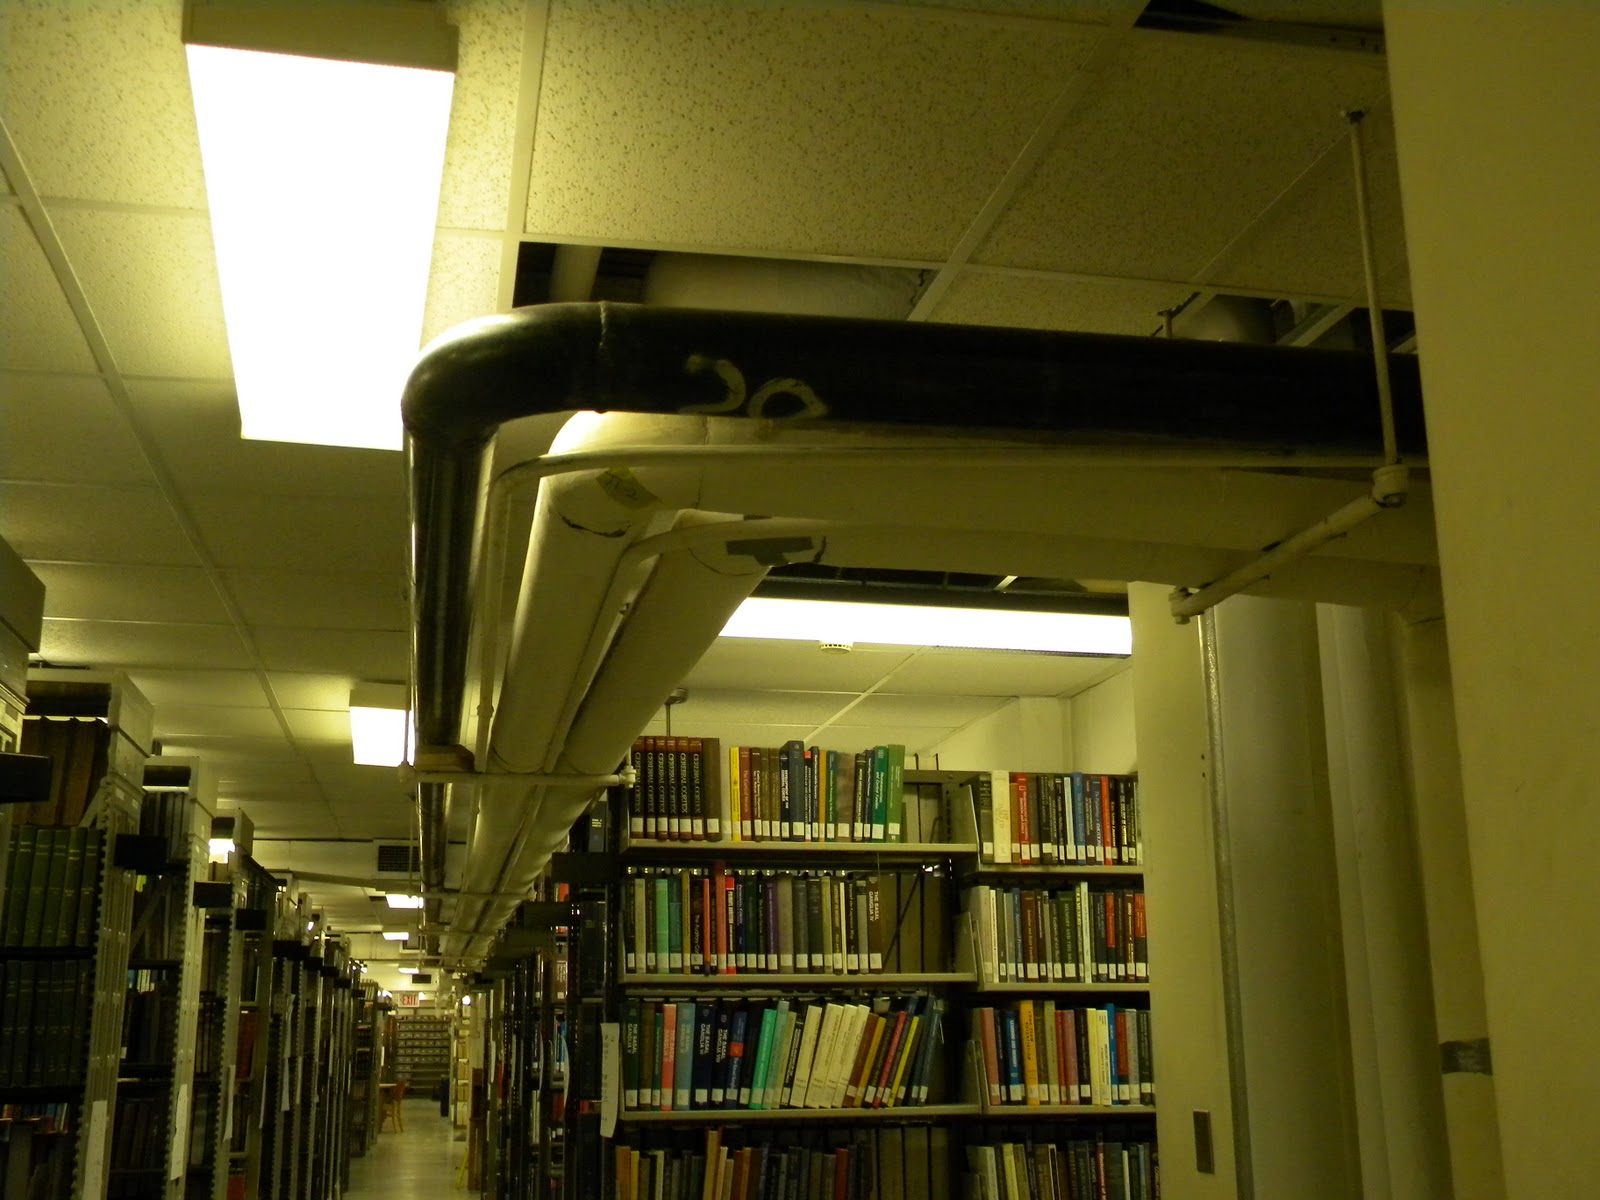 Exposed pipes run along the drop-down ceiling in a room of a library.